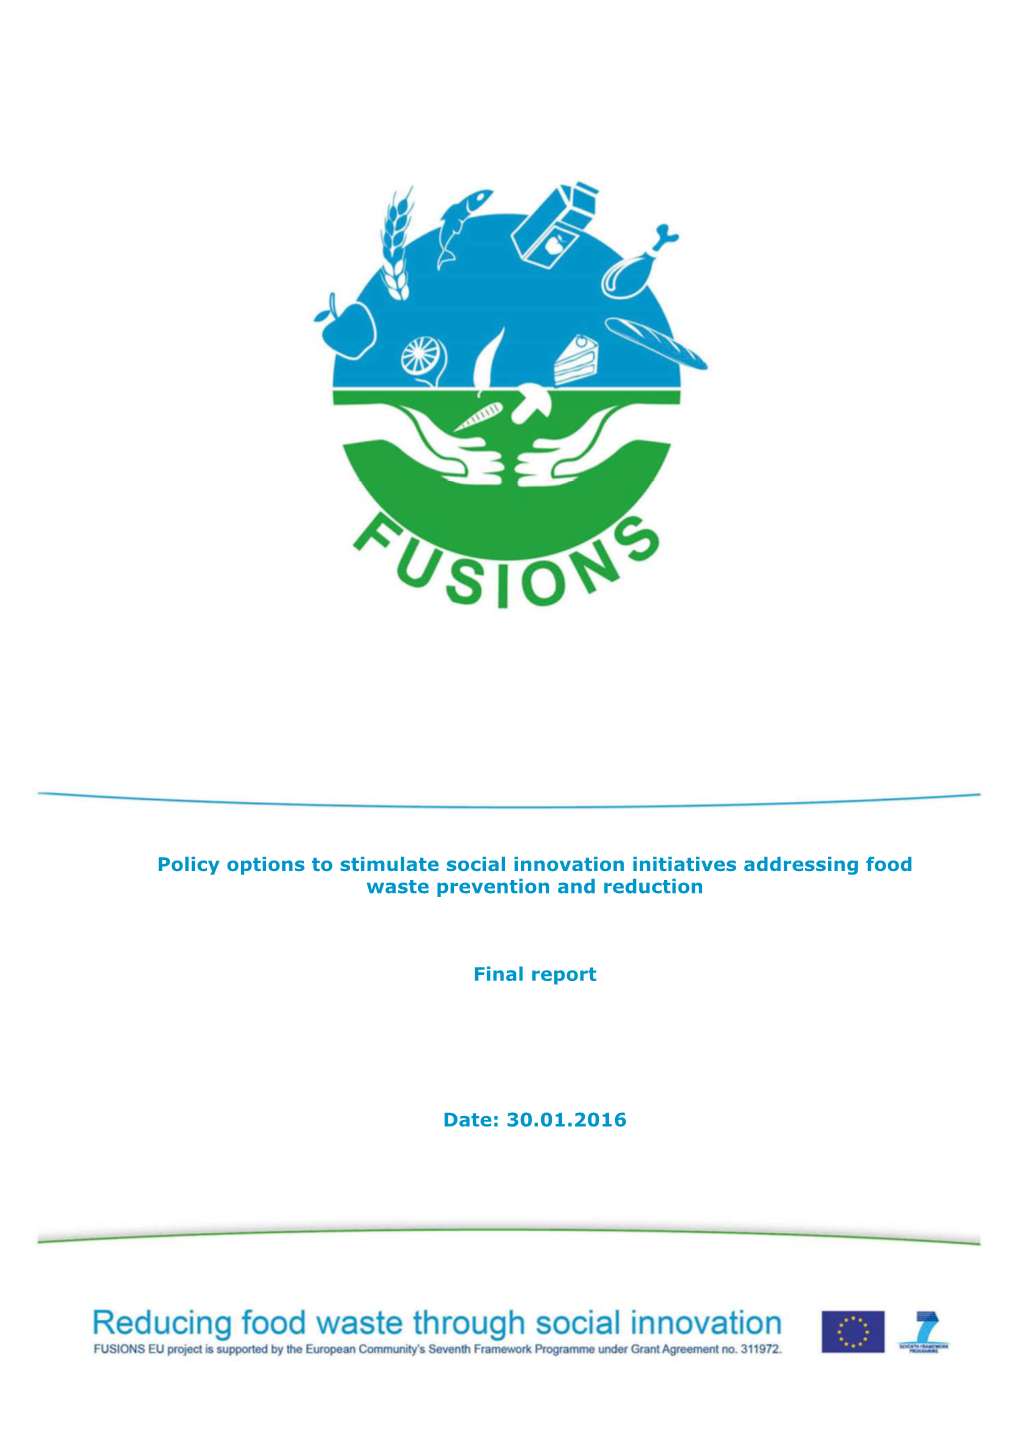 Policy Options to Stimulate Social Innovation Initiatives Addressing Food Waste Prevention and Reduction Final Report Date